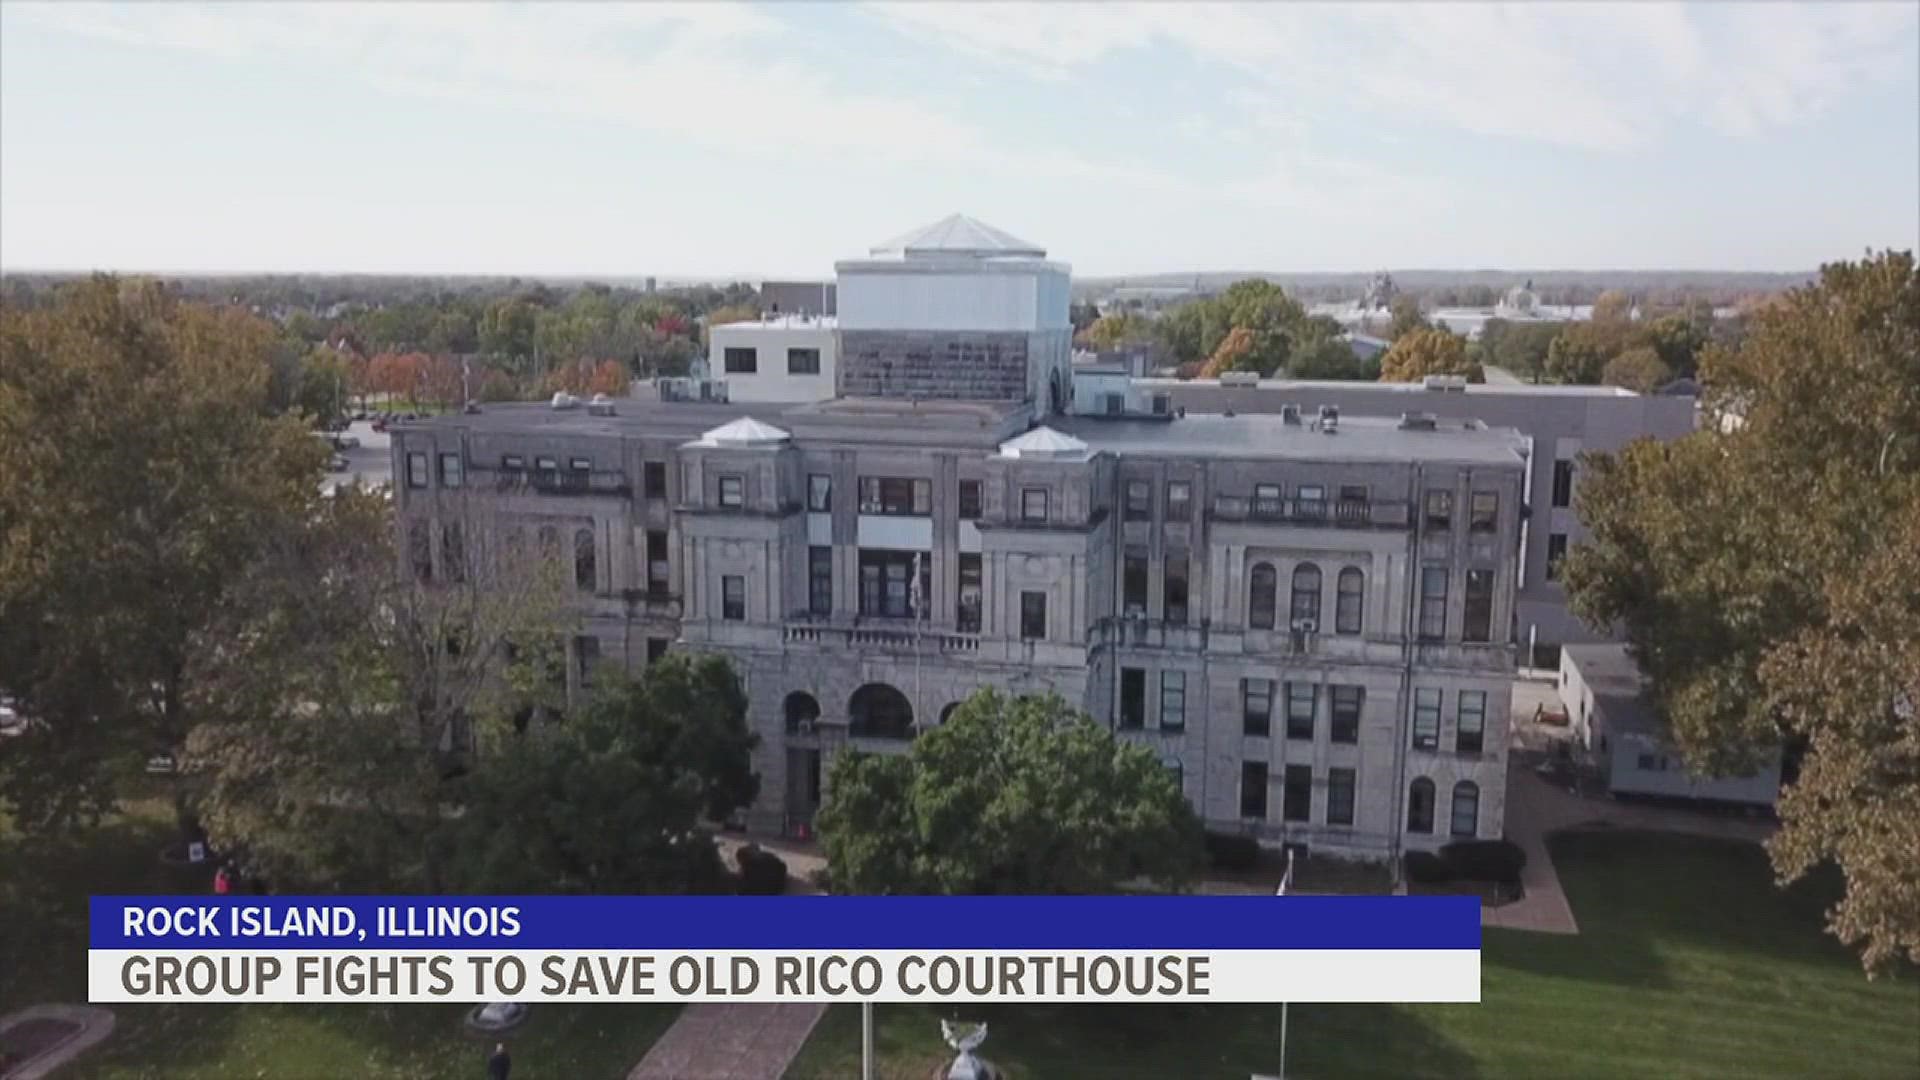 Some county residents are asking the county board to reconsider demolishing the old courthouse and repurpose it instead of turning it into an empty green space.